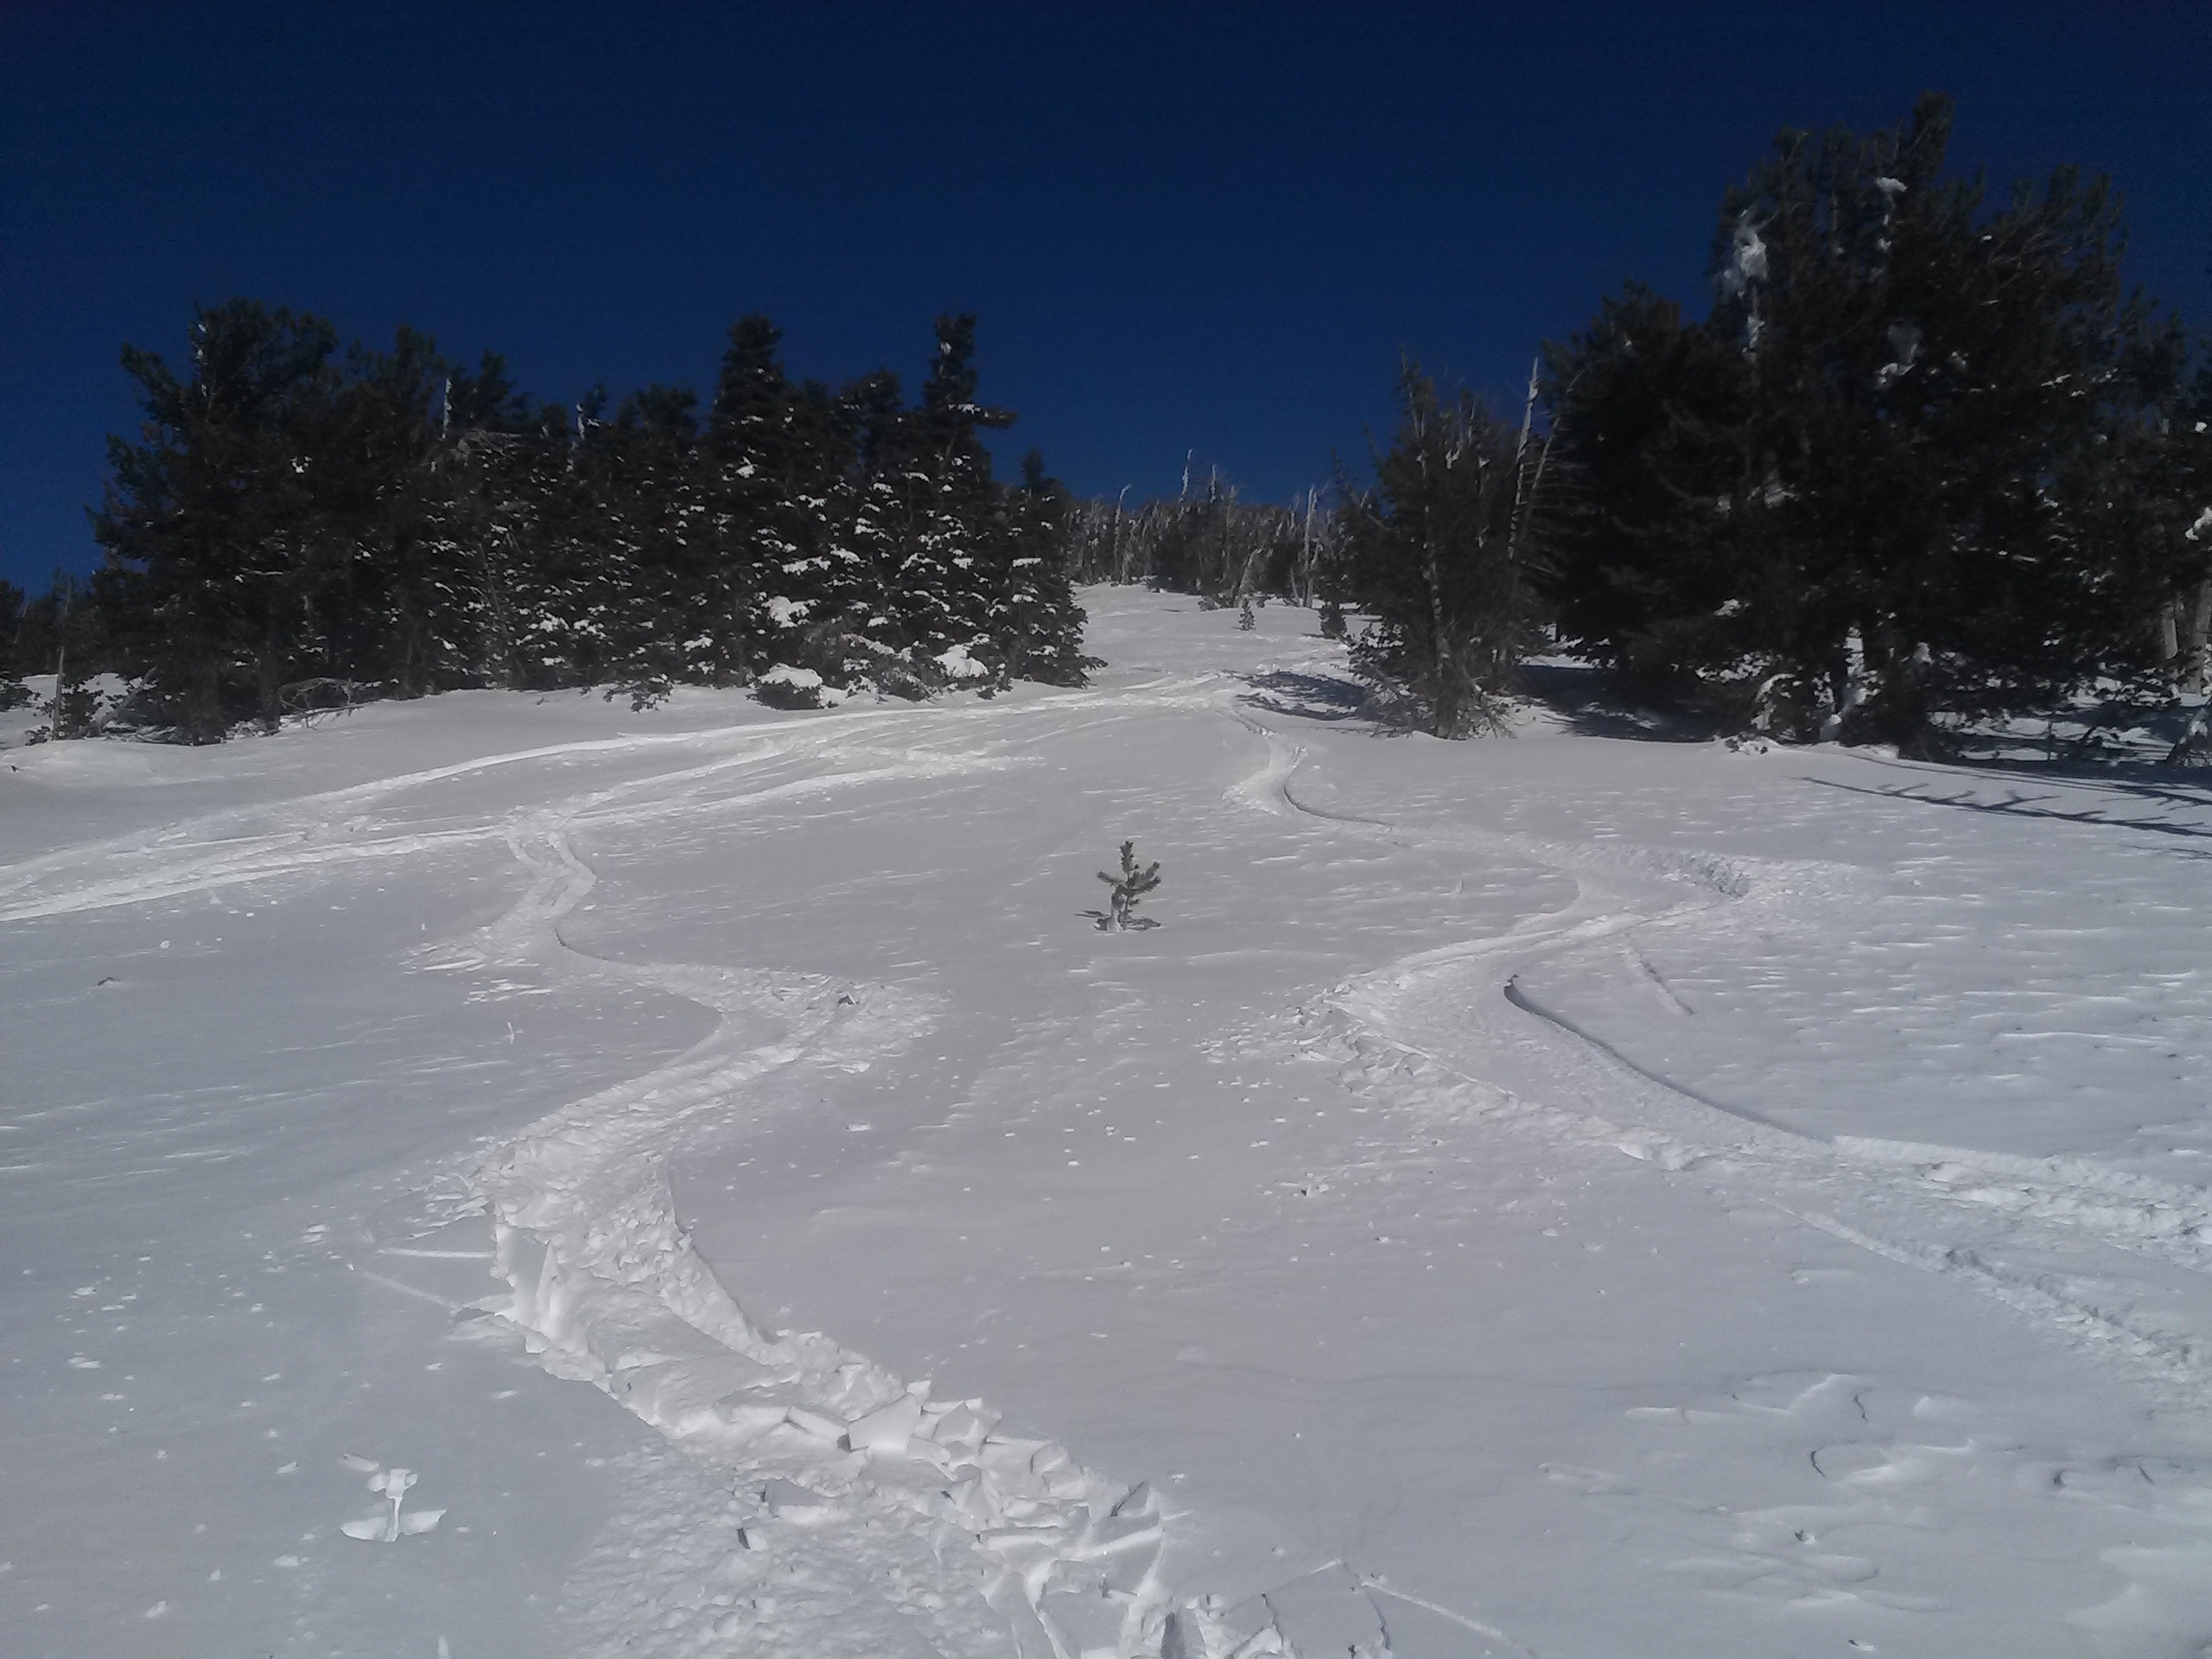 Skiing some powder on the South Side of Tumalo Mountain.